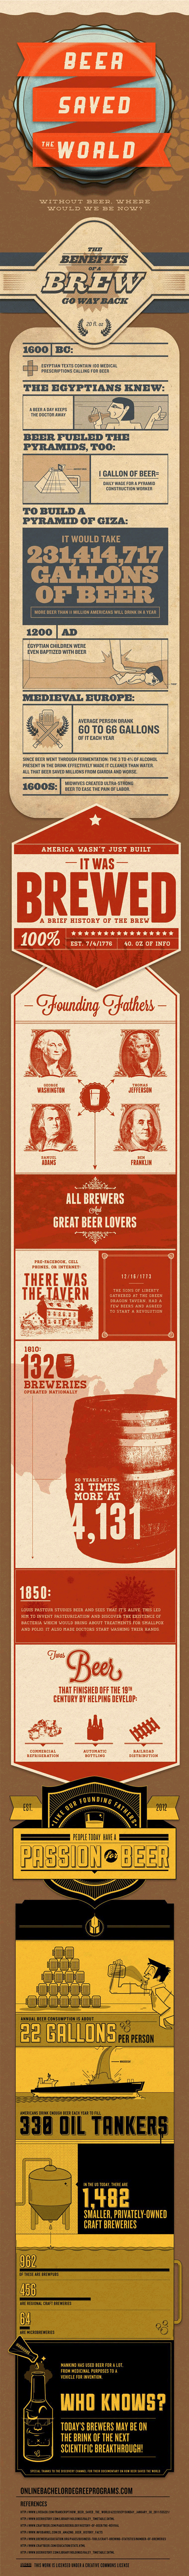 Infographic: The Truth About How Beer Saved The World 